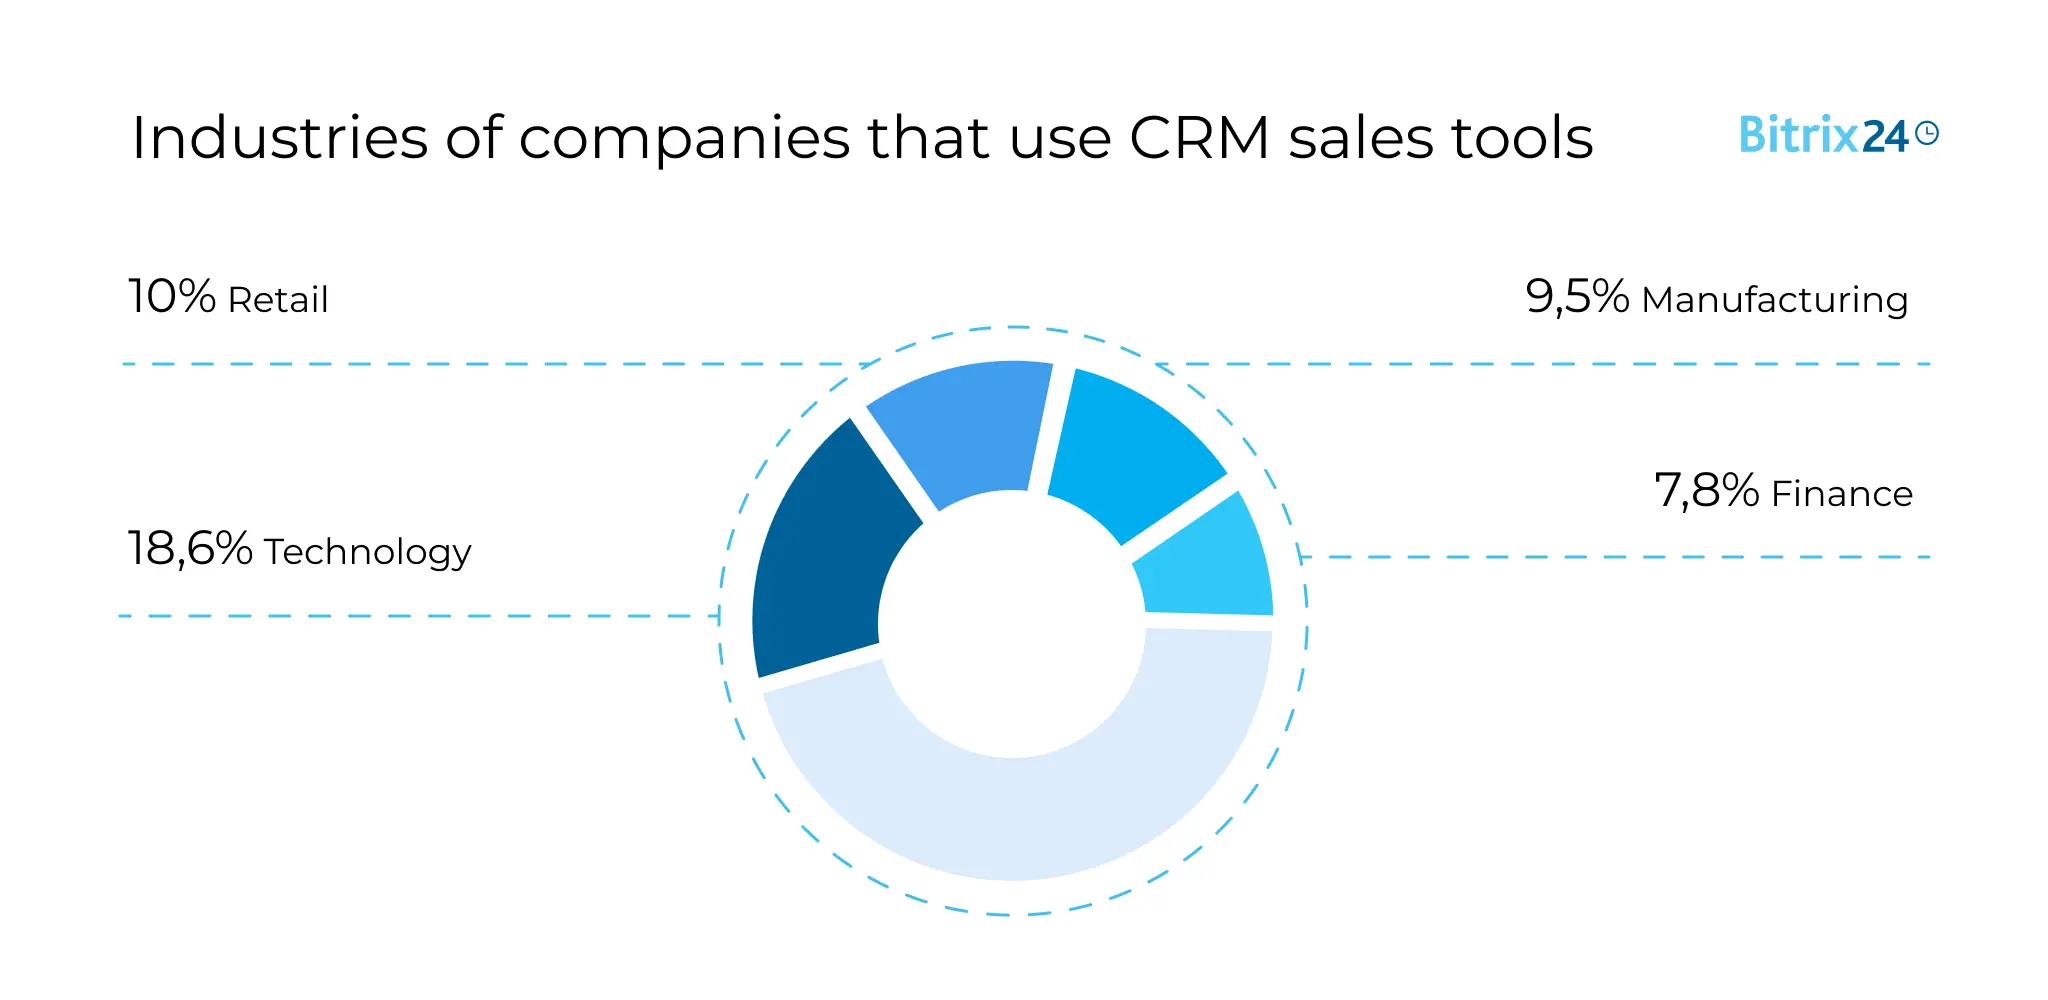  Industries of companies that use CRM sales tools